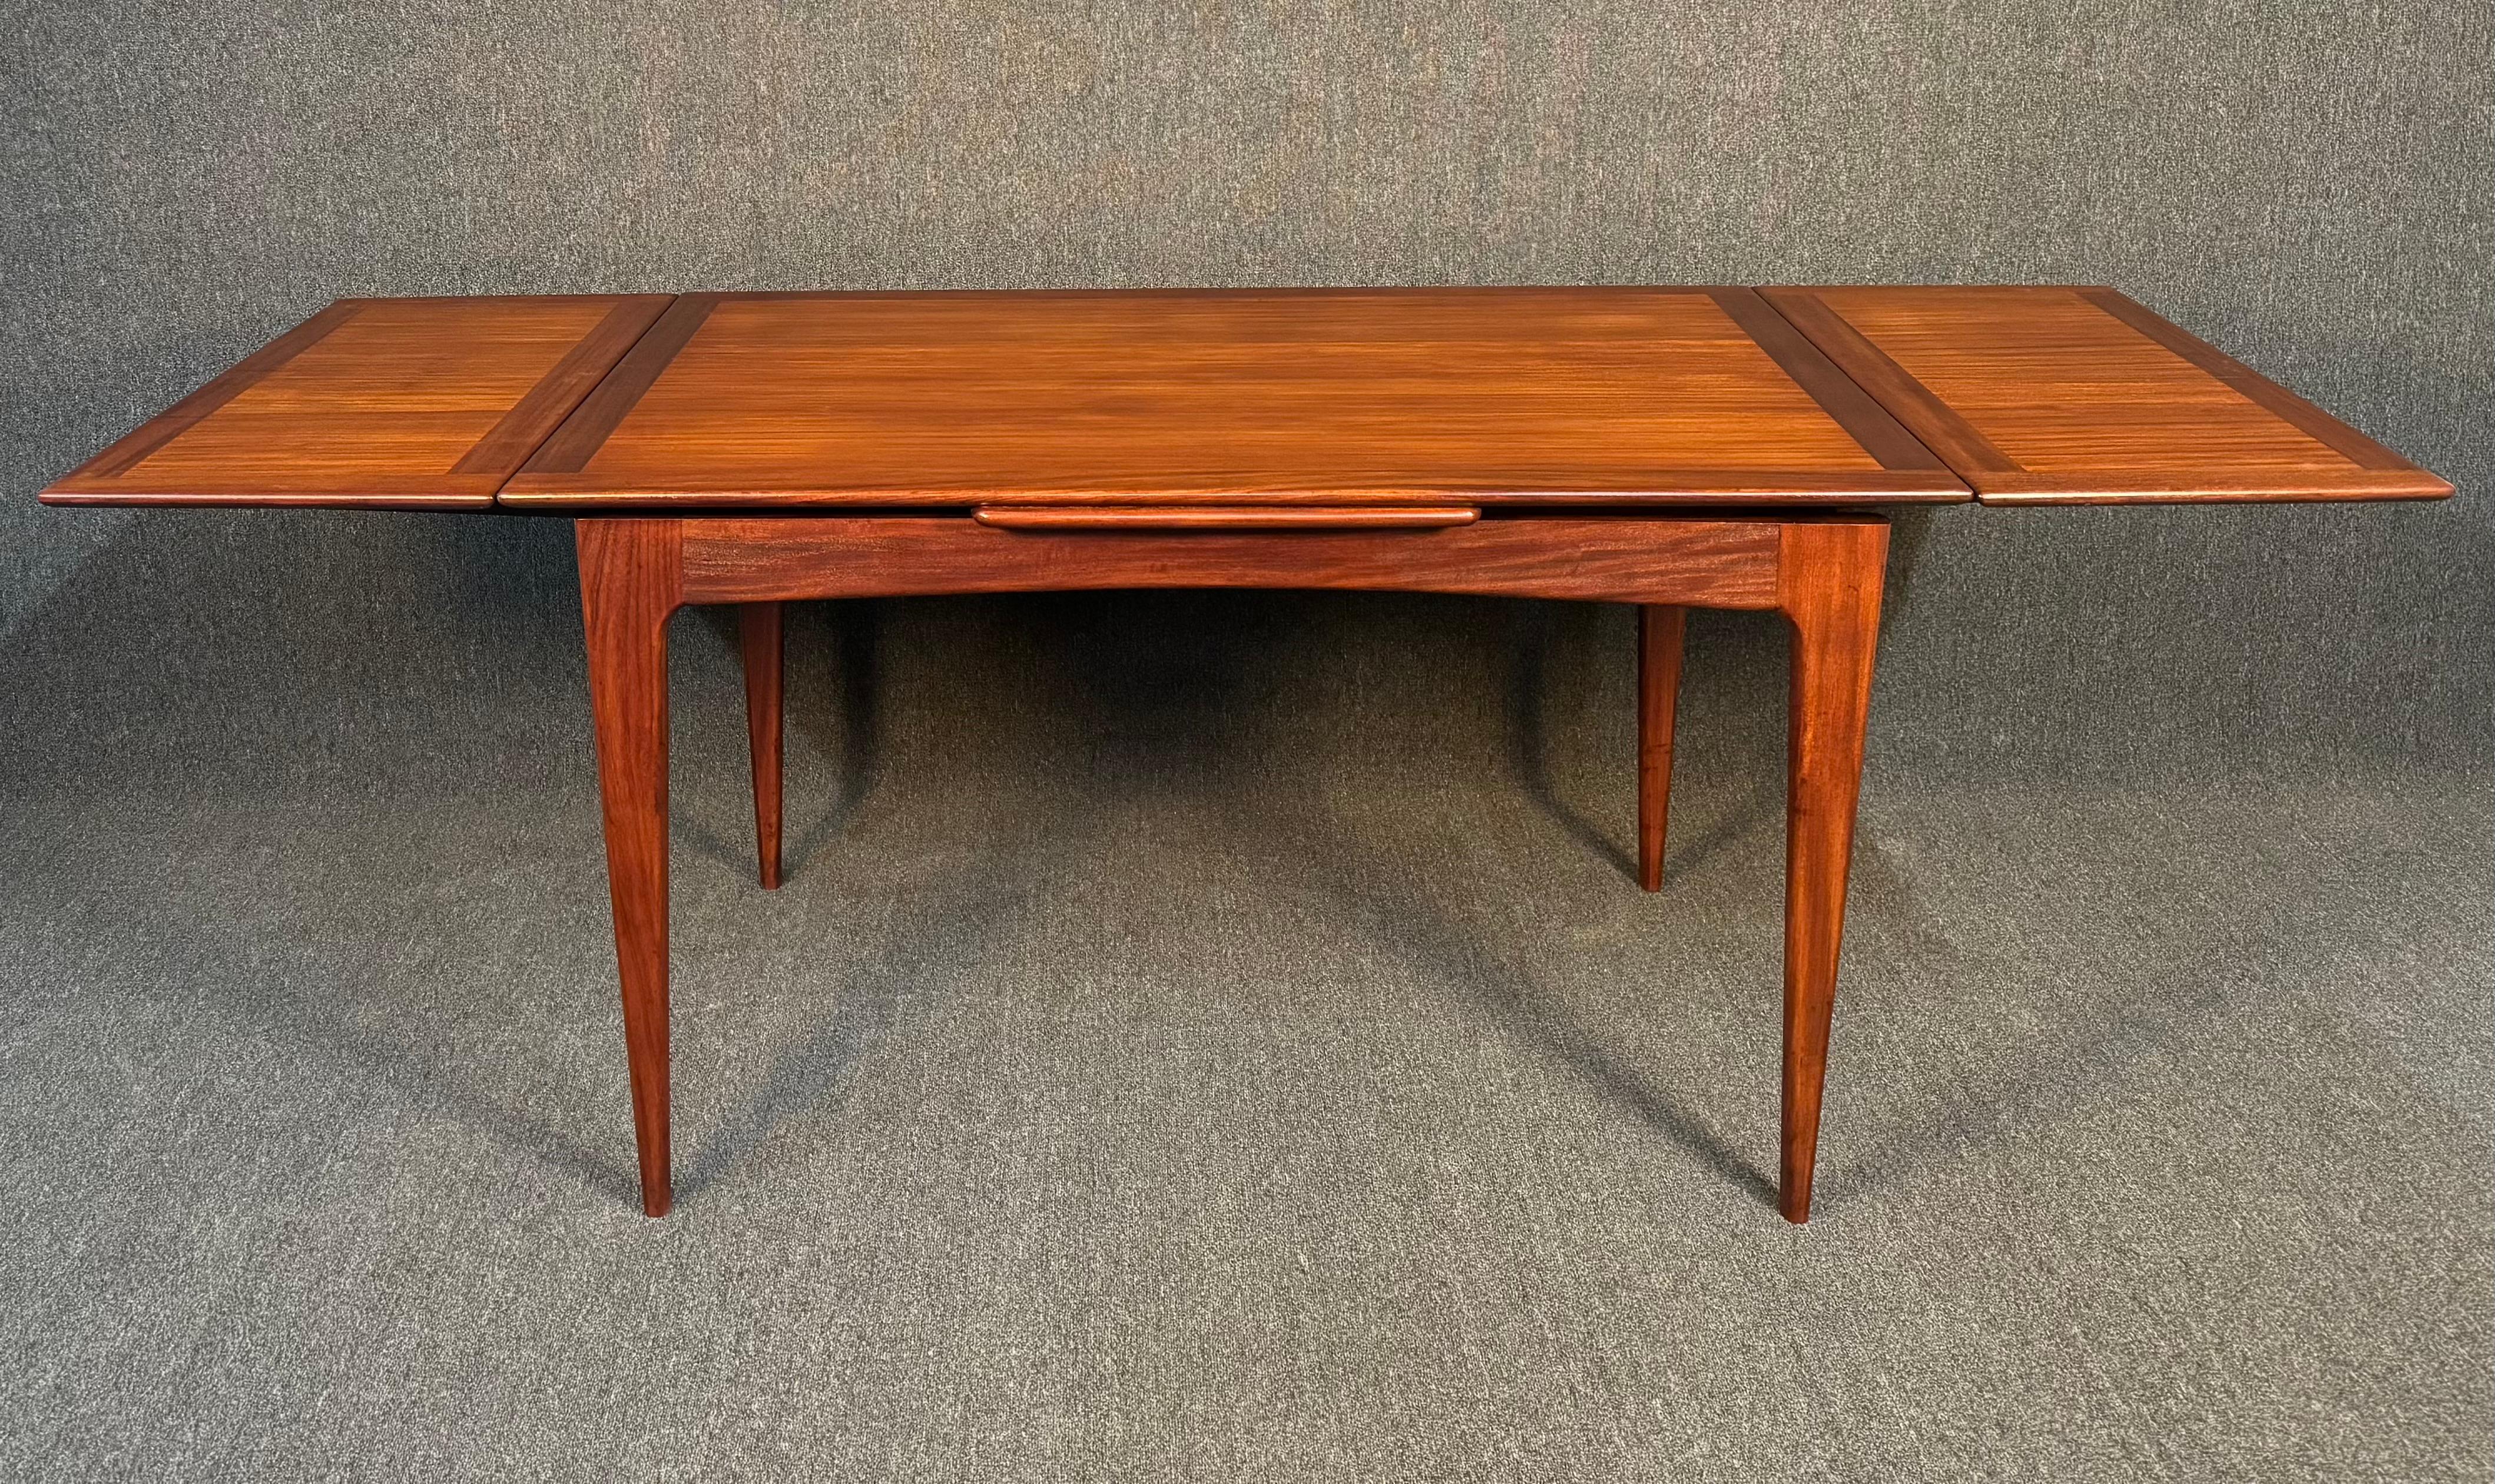 Vintage British Mid Century Modern Afromasia Teak Dining Table by A. Younger Ltd For Sale 1